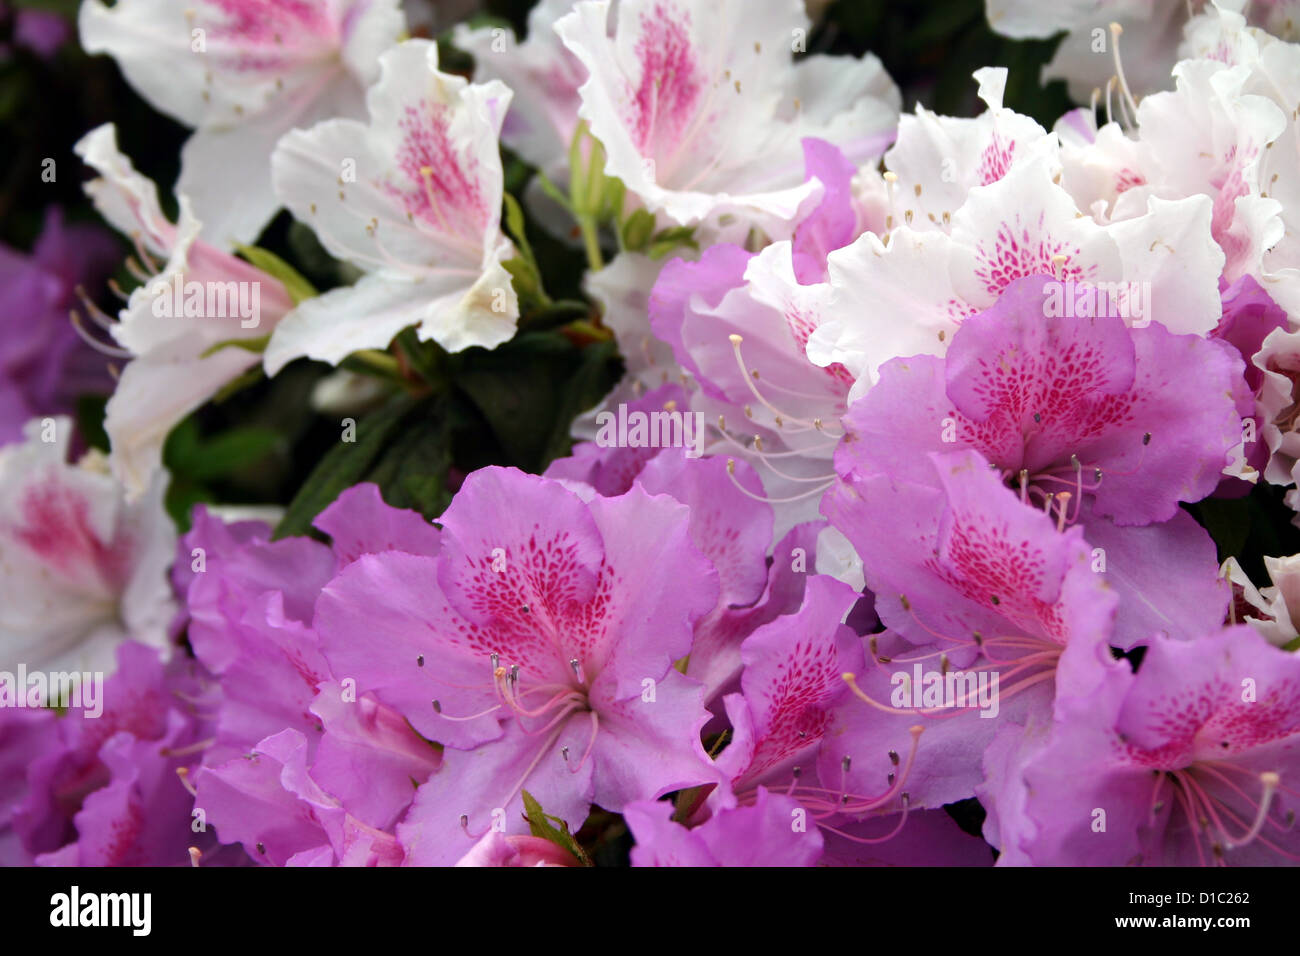 Blooming azaleas, Rhododendrons Stock Photo